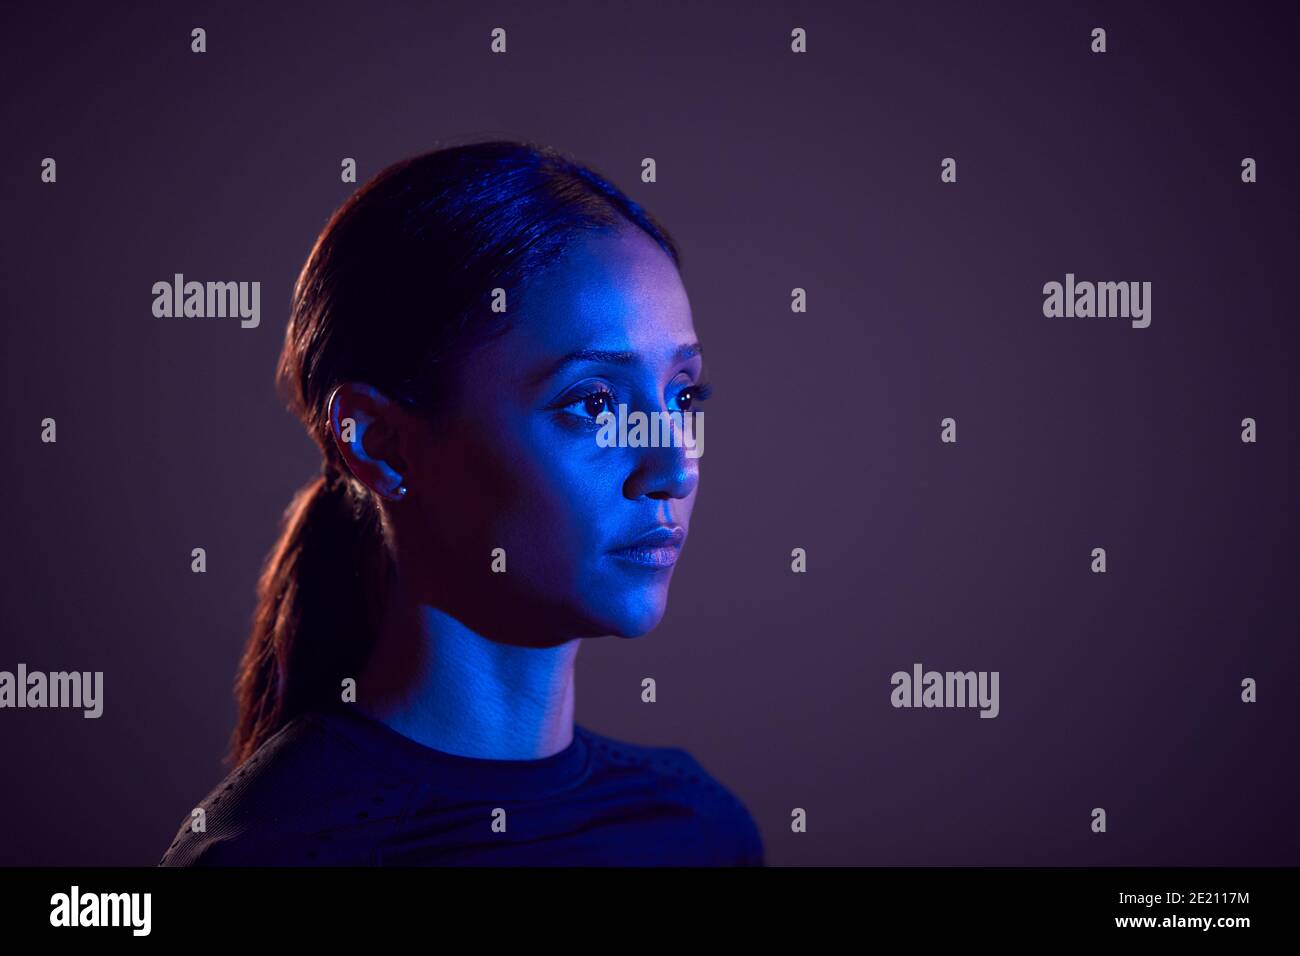 Studio Profile Shot Of Woman With Face Illuminated By Blue Light Stock  Photo - Alamy